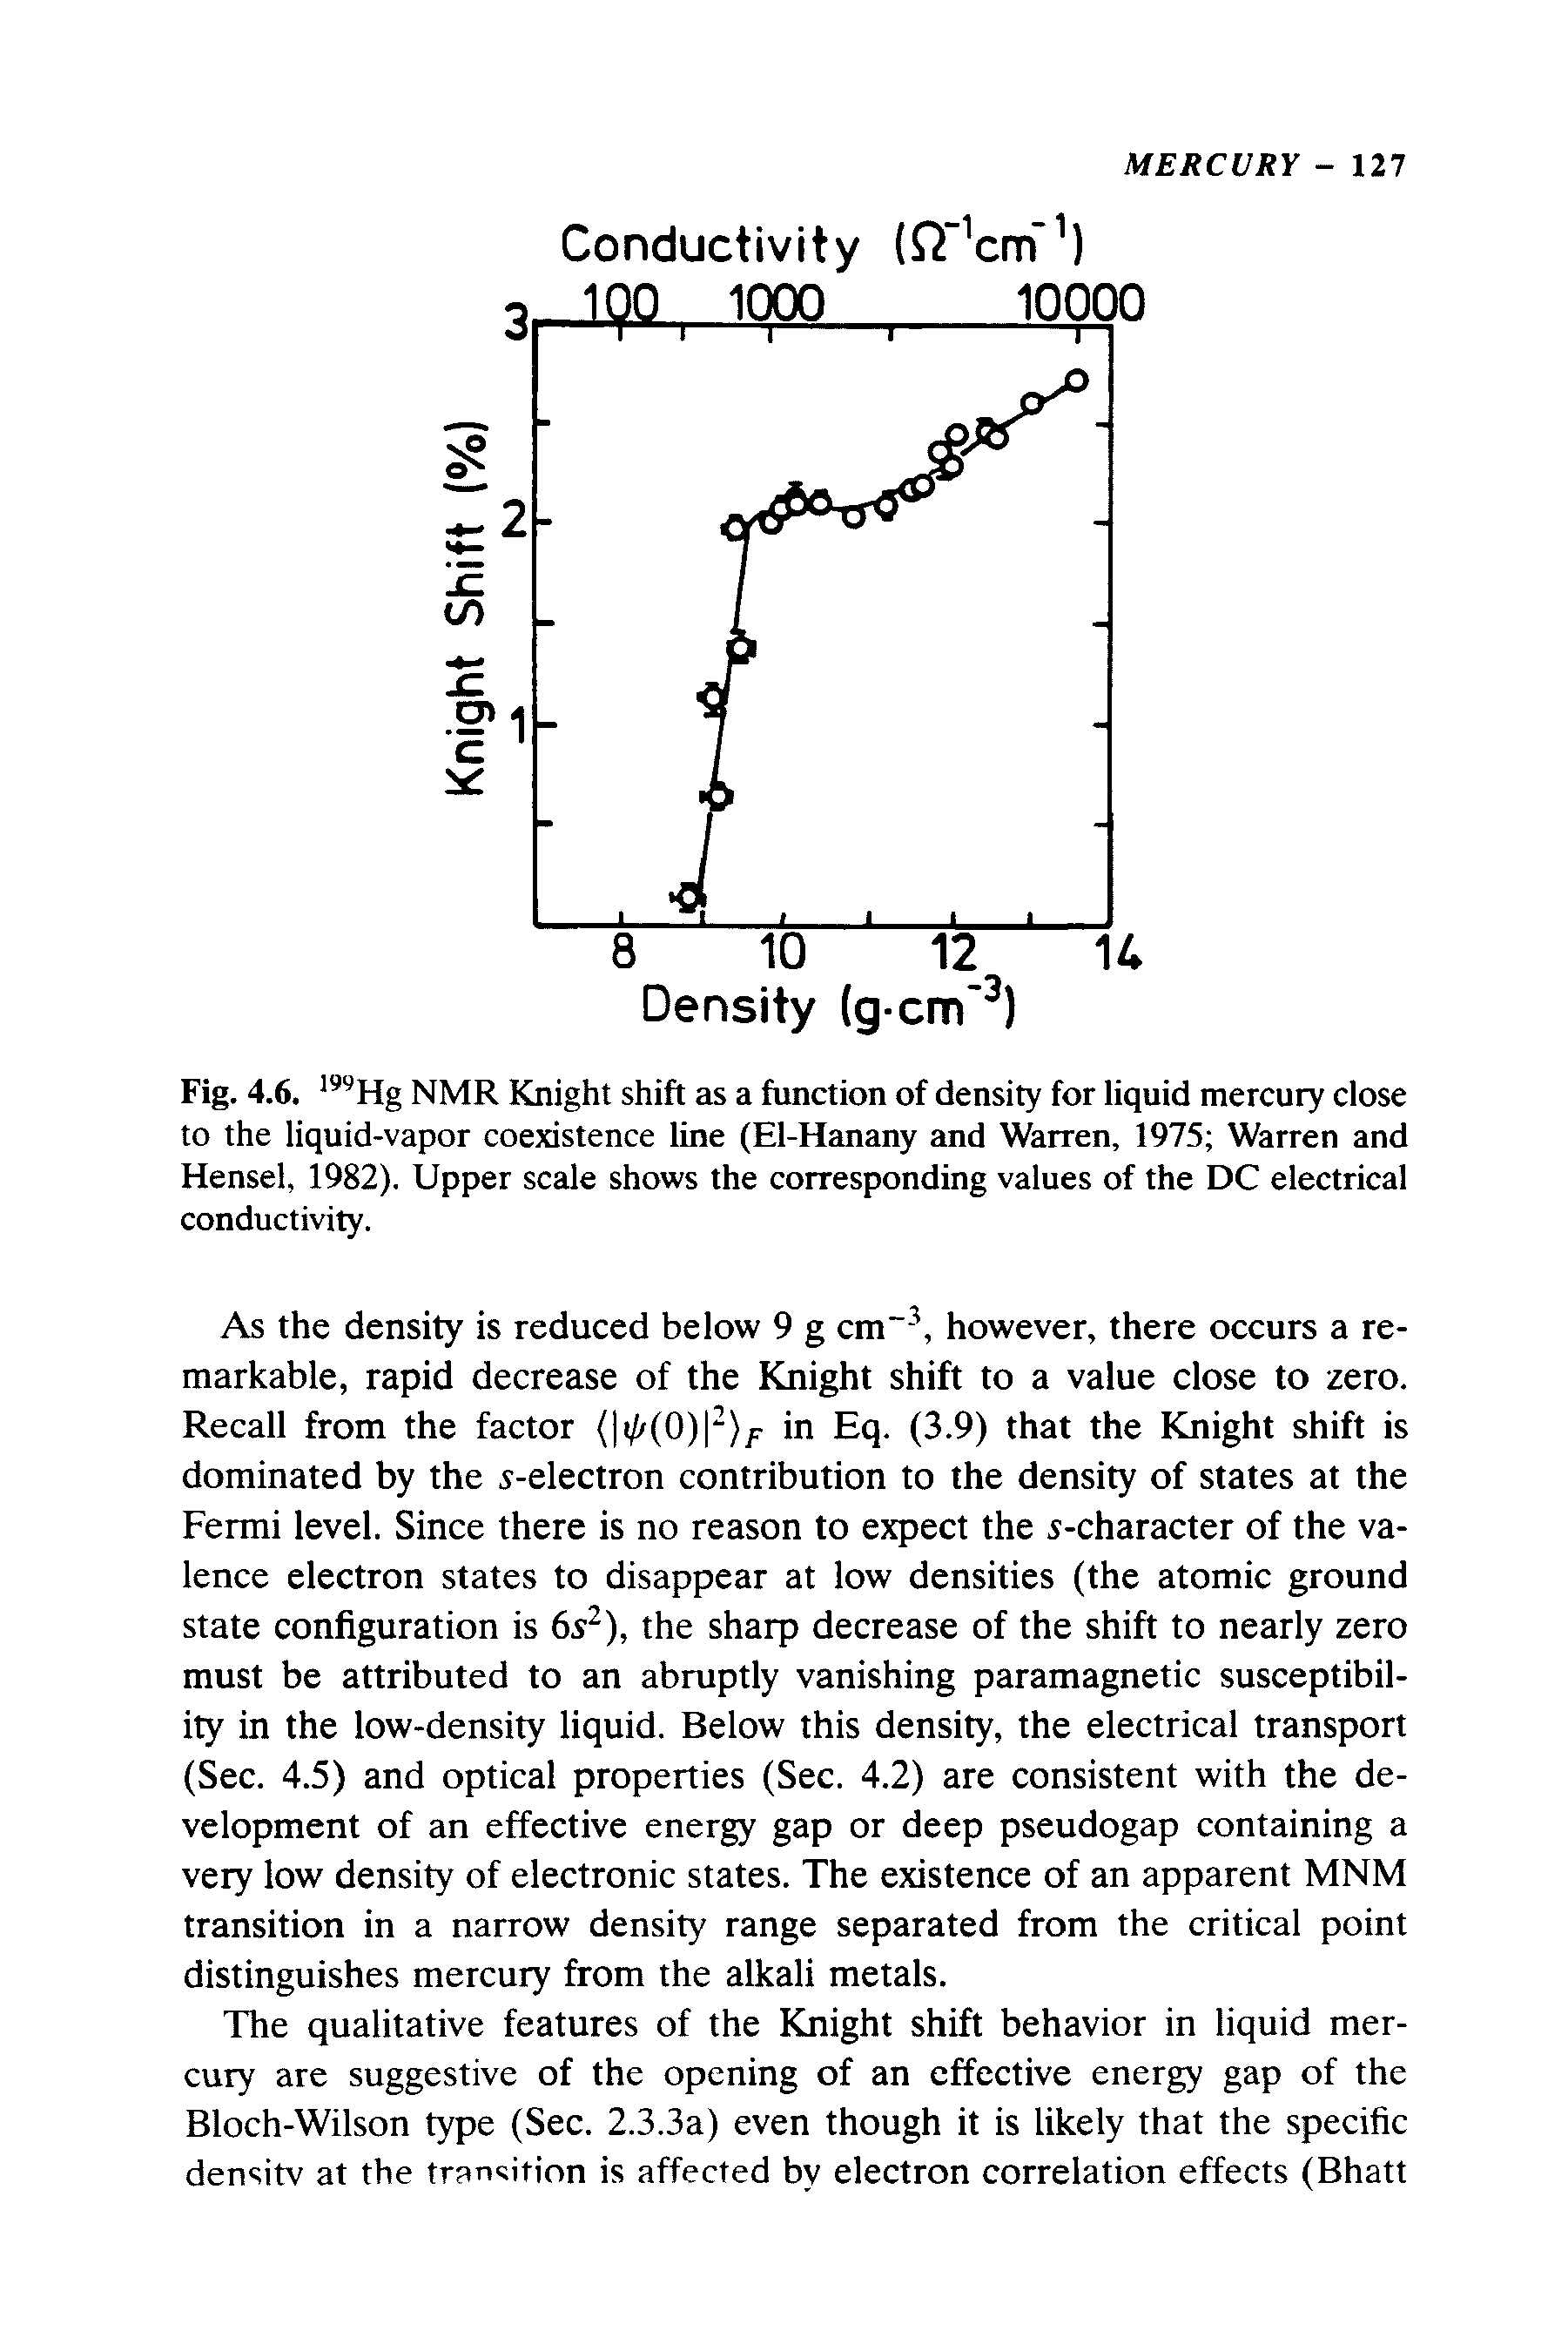 Fig. 4.6. NMR Knight shift as a function of density for liquid mercury close to the liquid-vapor coexistence line (El-Hanany and Warren, 1975 Warren and Hensel, 1982). Upper scale shows the corresponding values of the DC electrical conductivity.